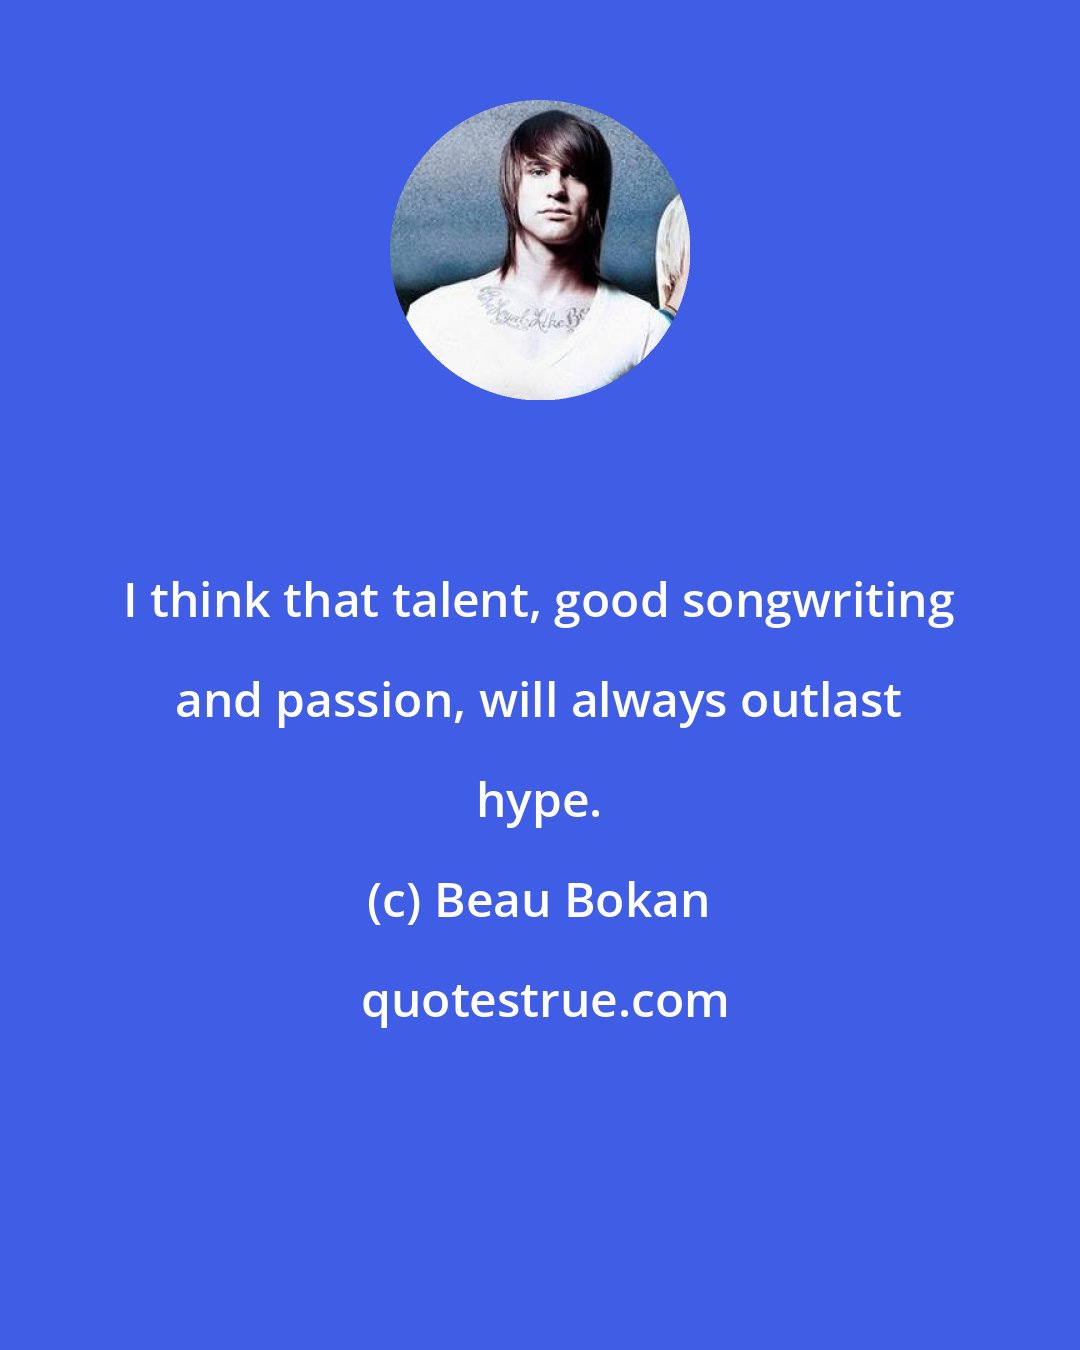 Beau Bokan: I think that talent, good songwriting and passion, will always outlast hype.